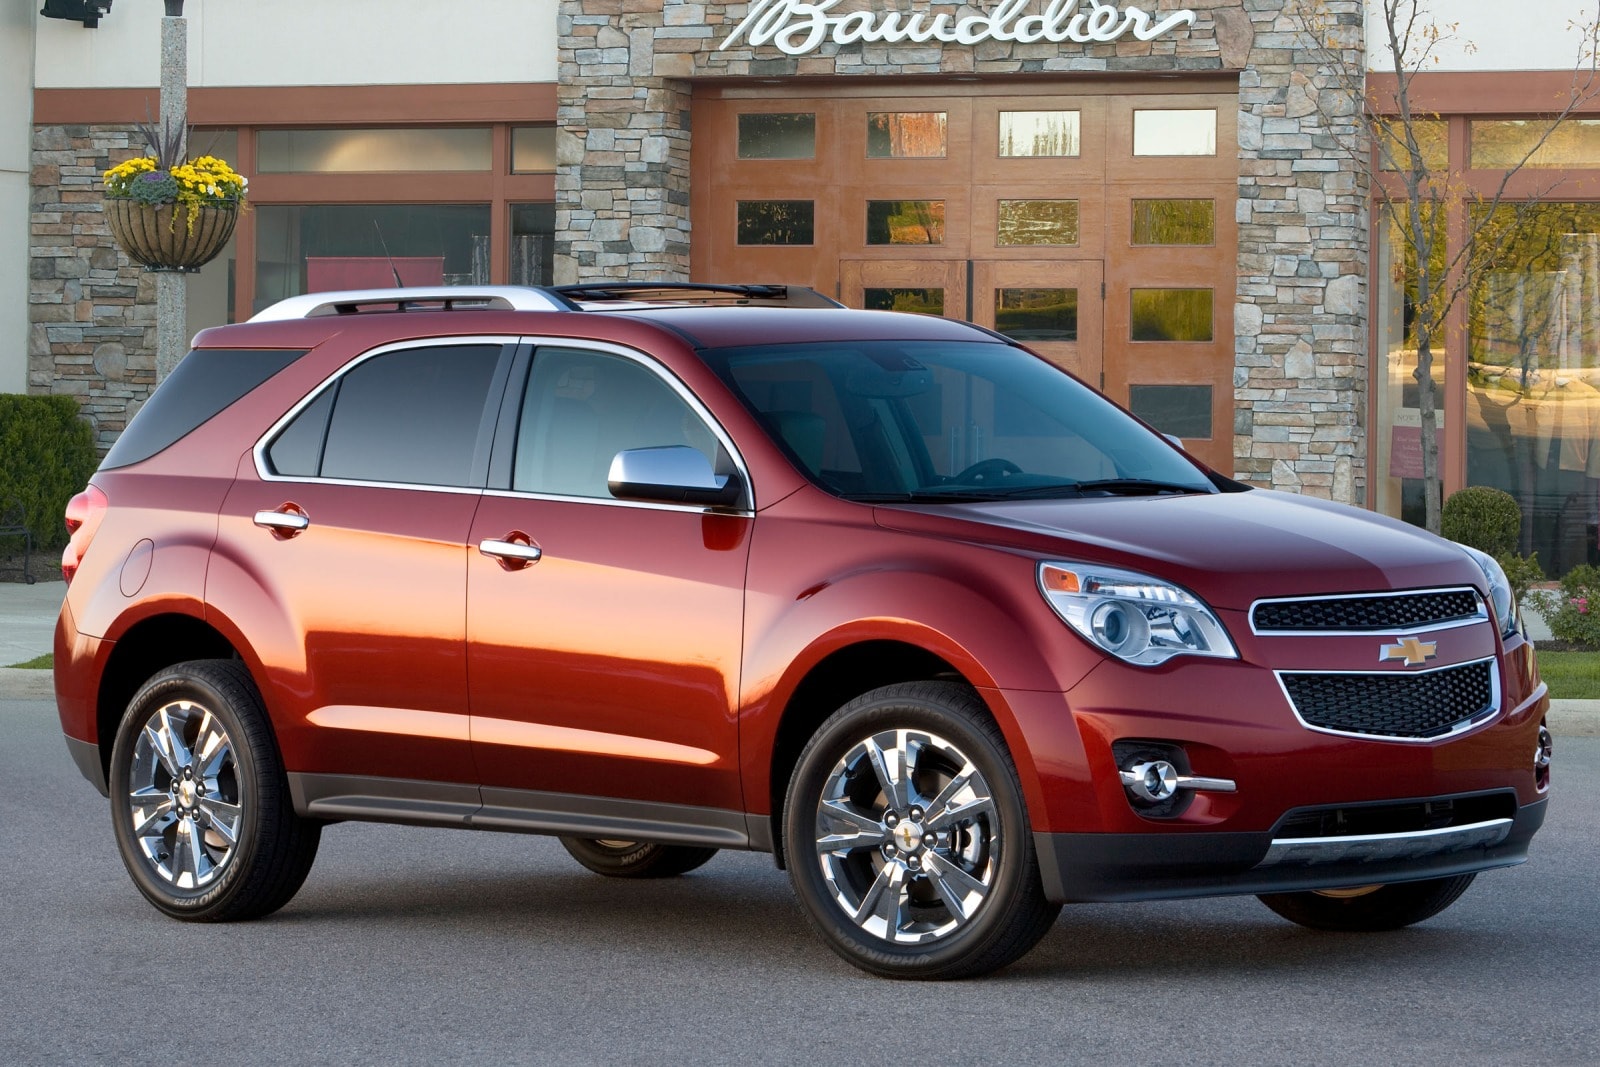 2013 Chevy Equinox Review & Ratings | Edmunds